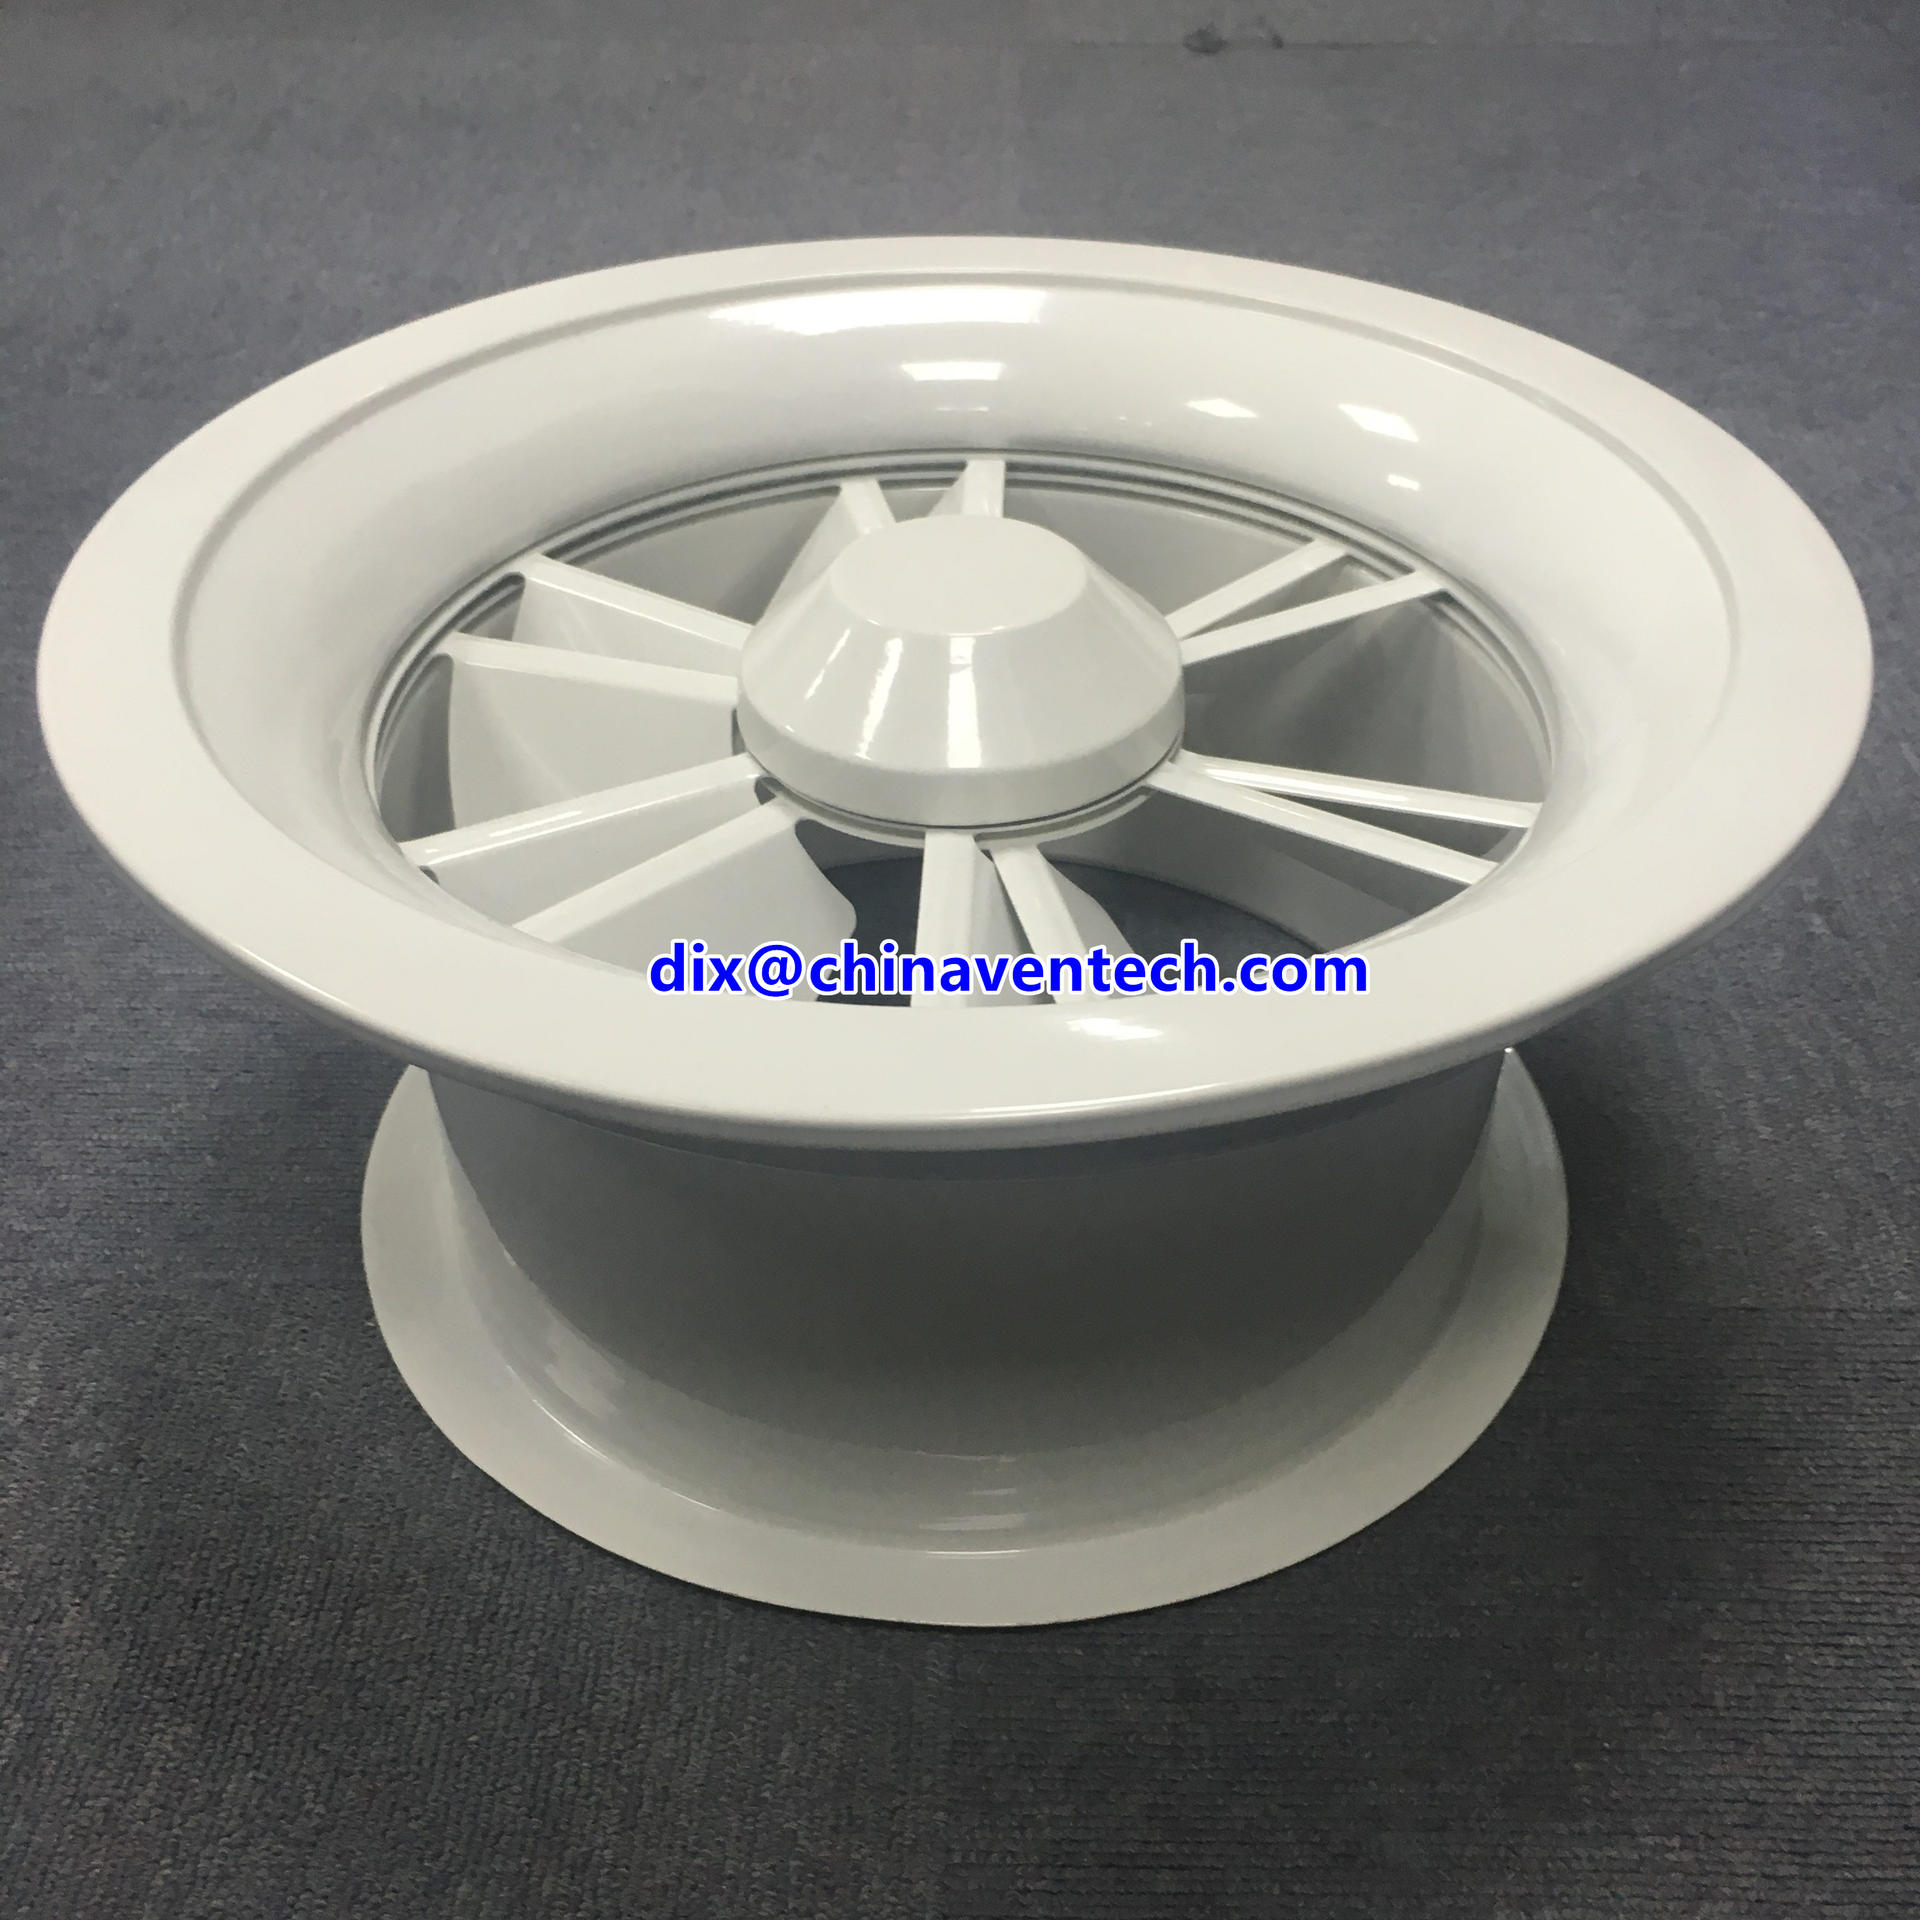 HVAC air diffusion product duct work mounted supply air round swirl diffuser